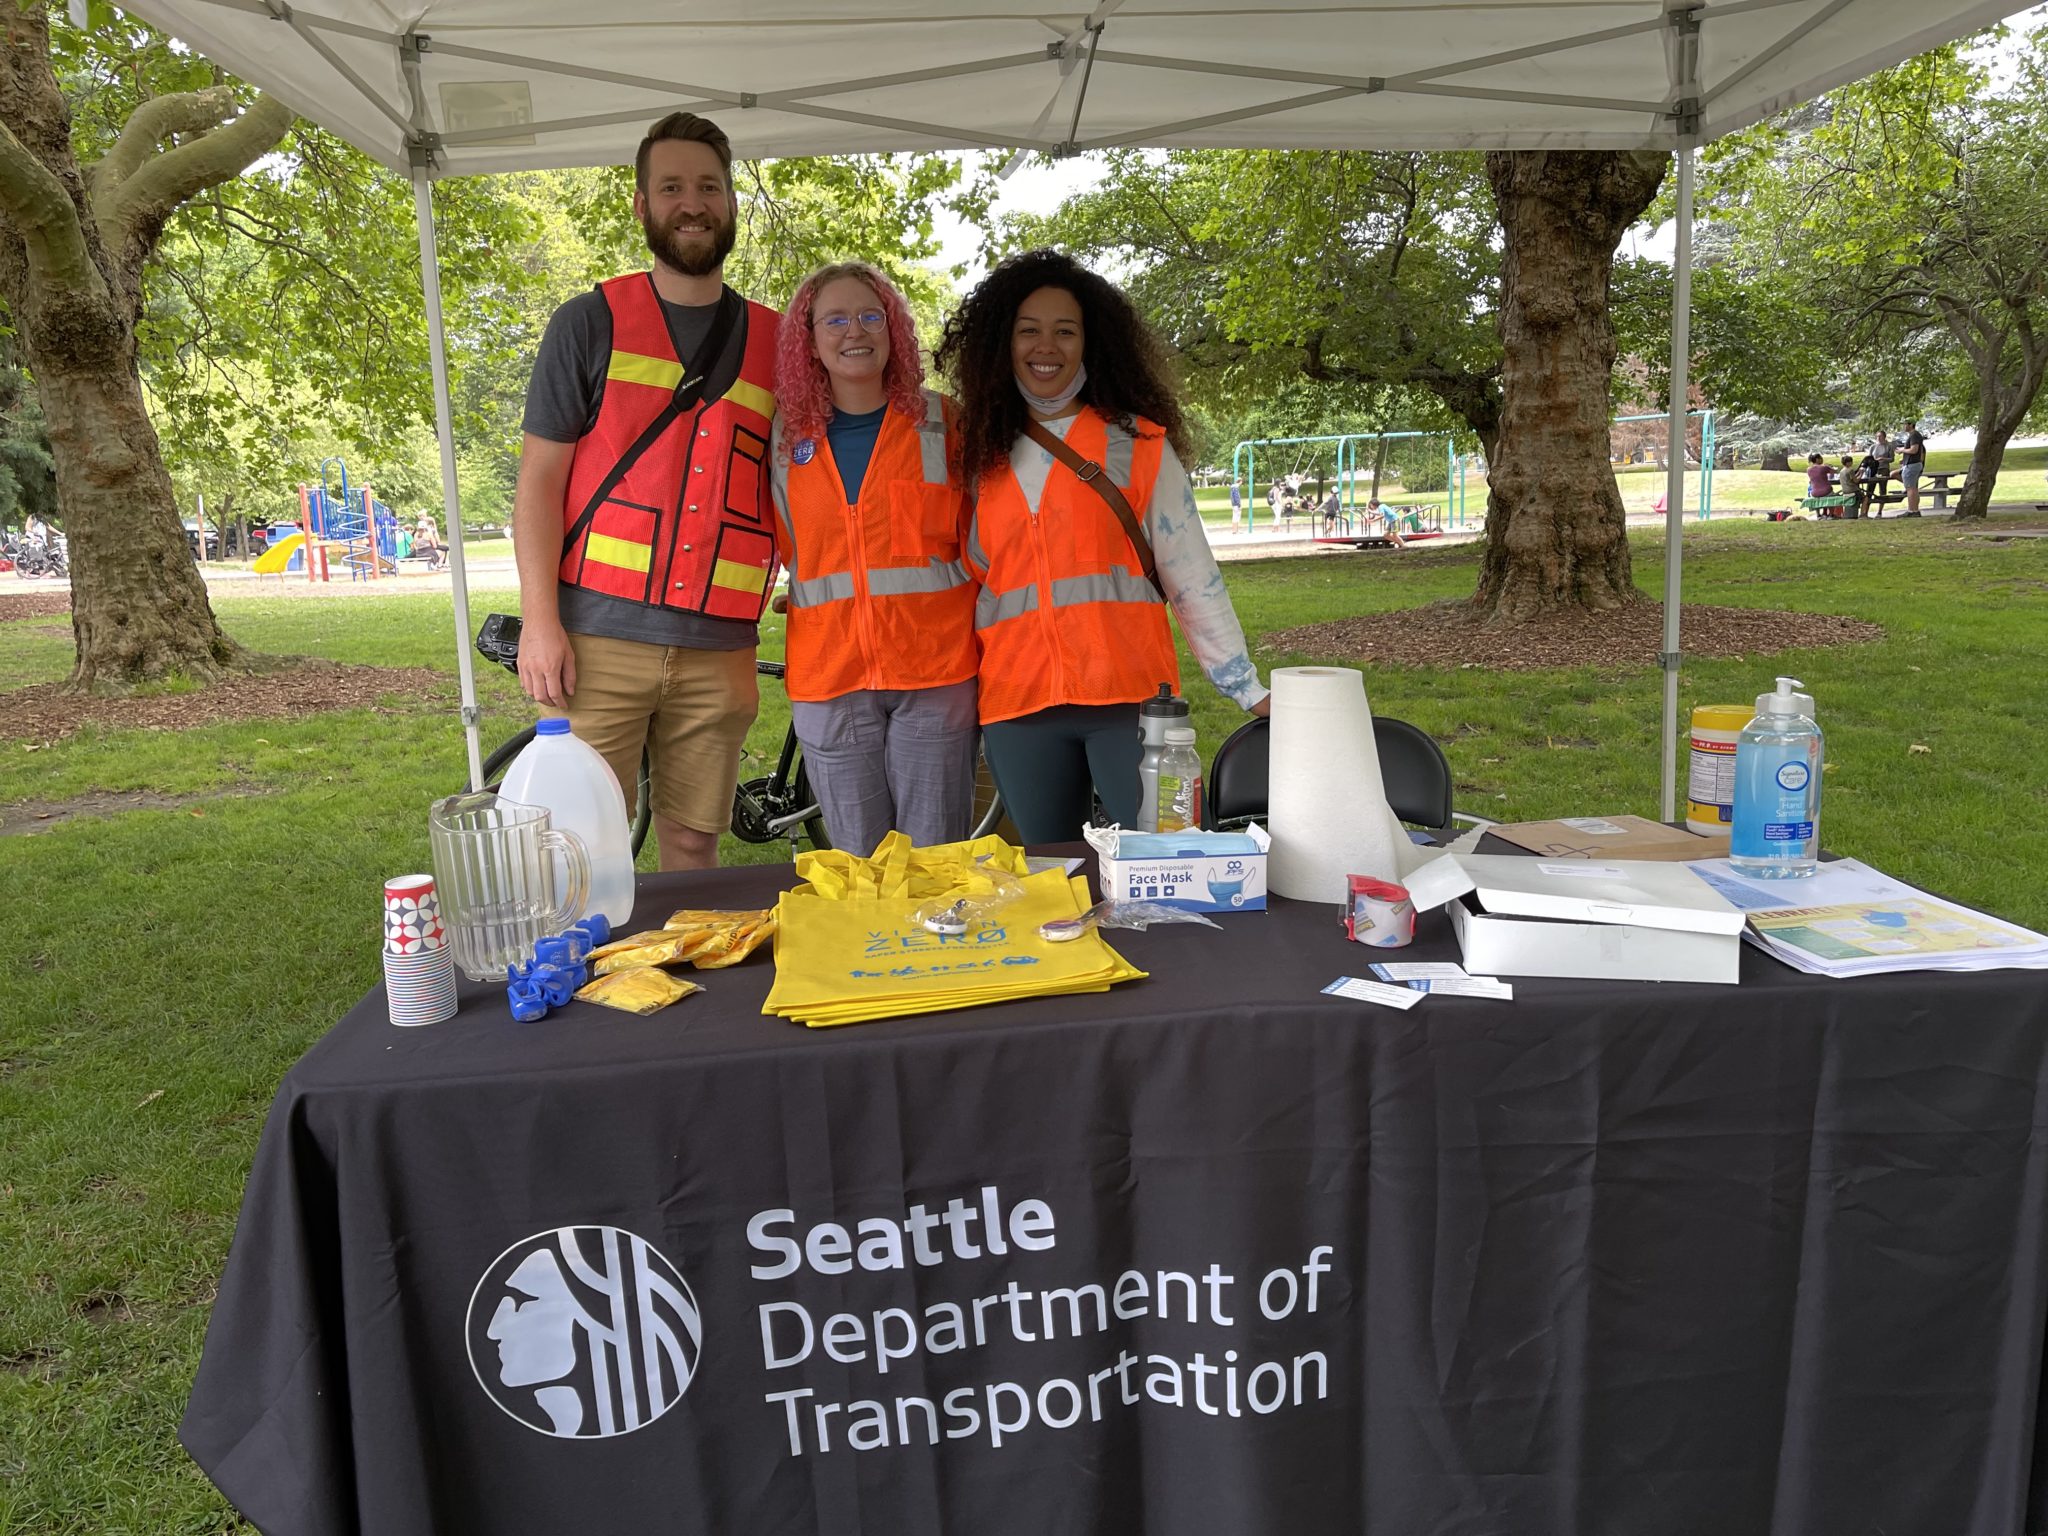 Members of the SDOT team smile while tabling at a past community event in a city park.